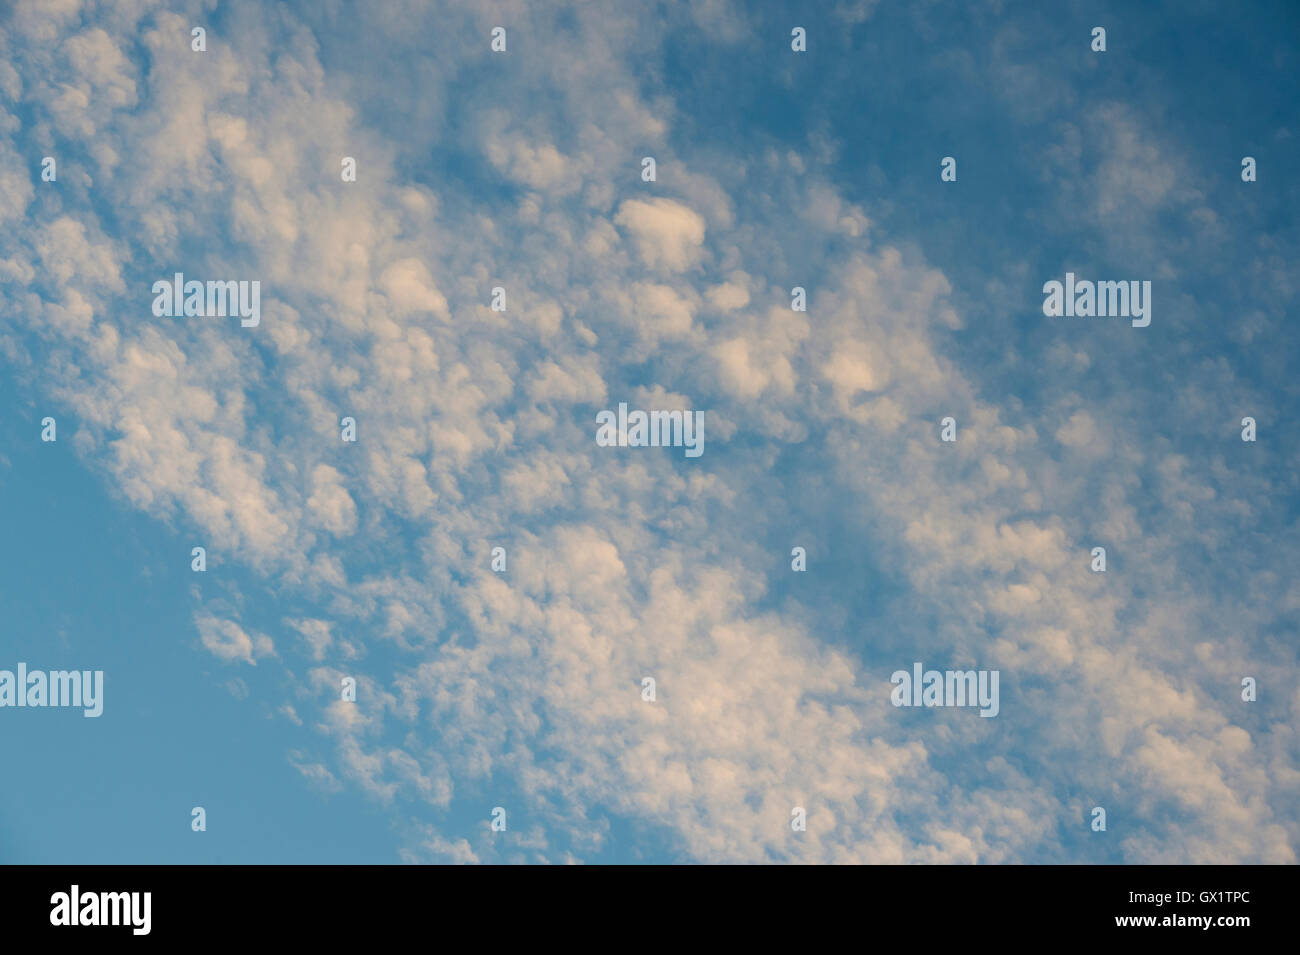 Early morning clouds at sunrise against a blue sky. UK Stock Photo